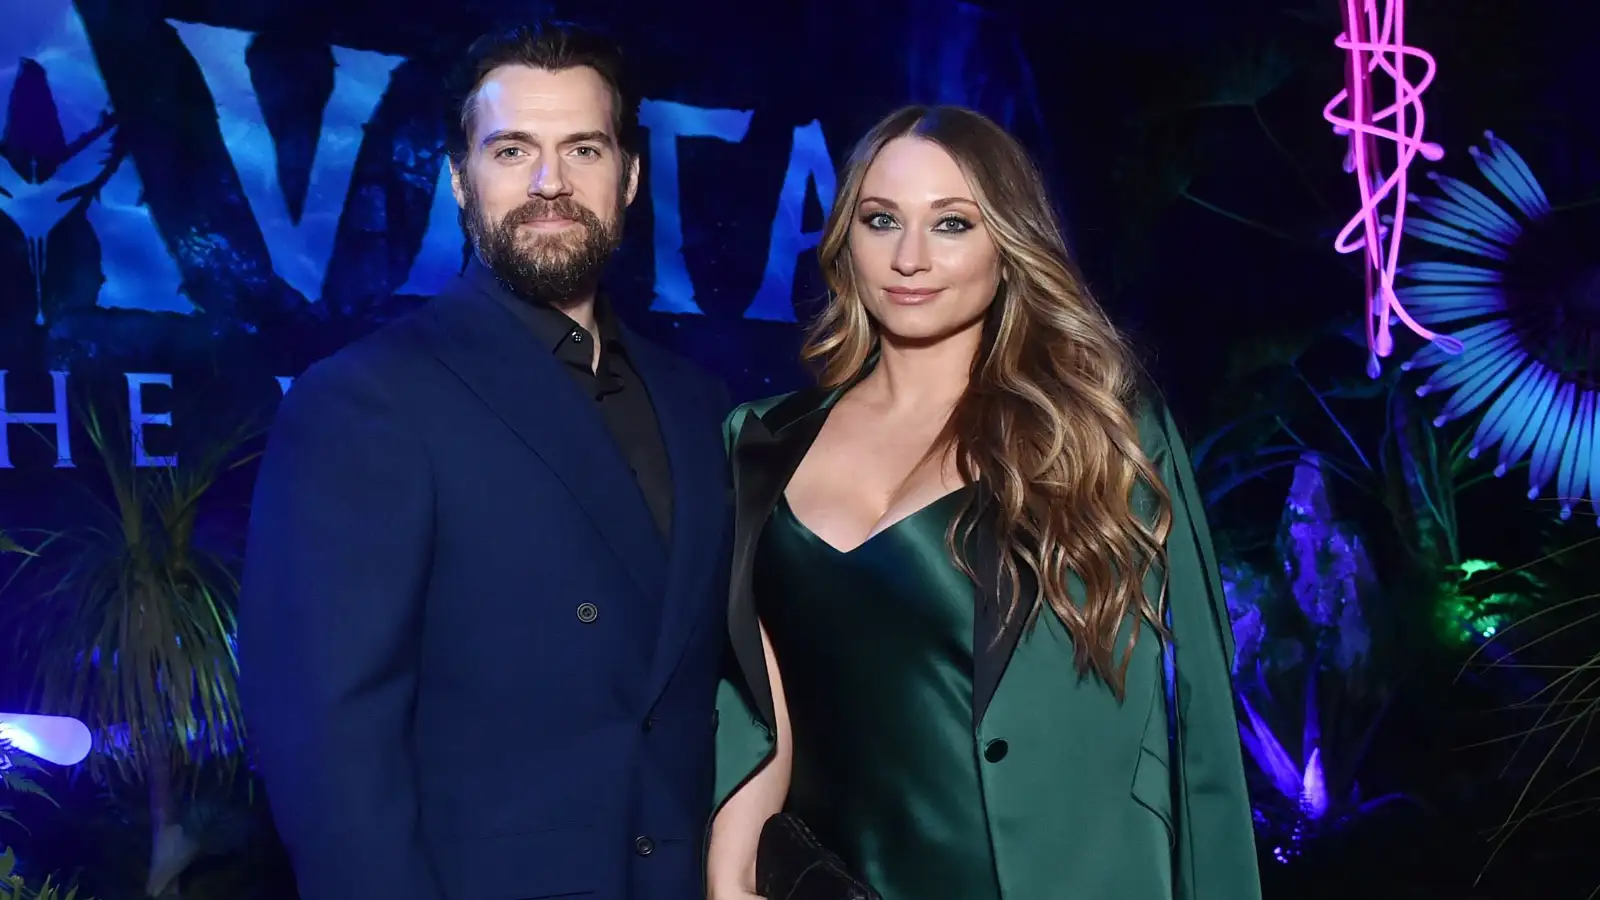 Henry Cavill Reveals How His Girlfriend Improved His Life